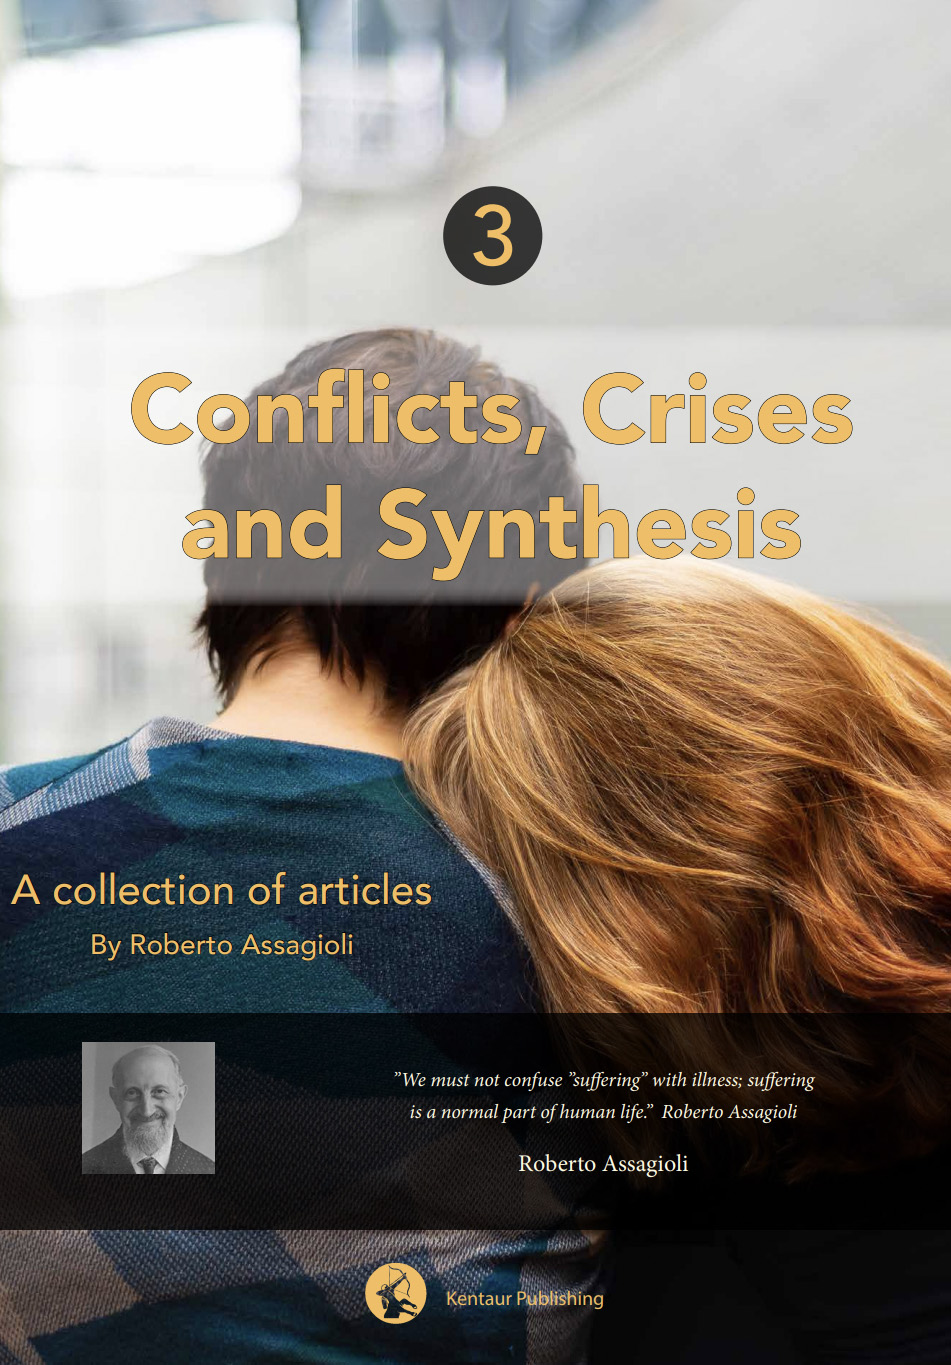 Conflicts Crises and Synthesis - Free E-book